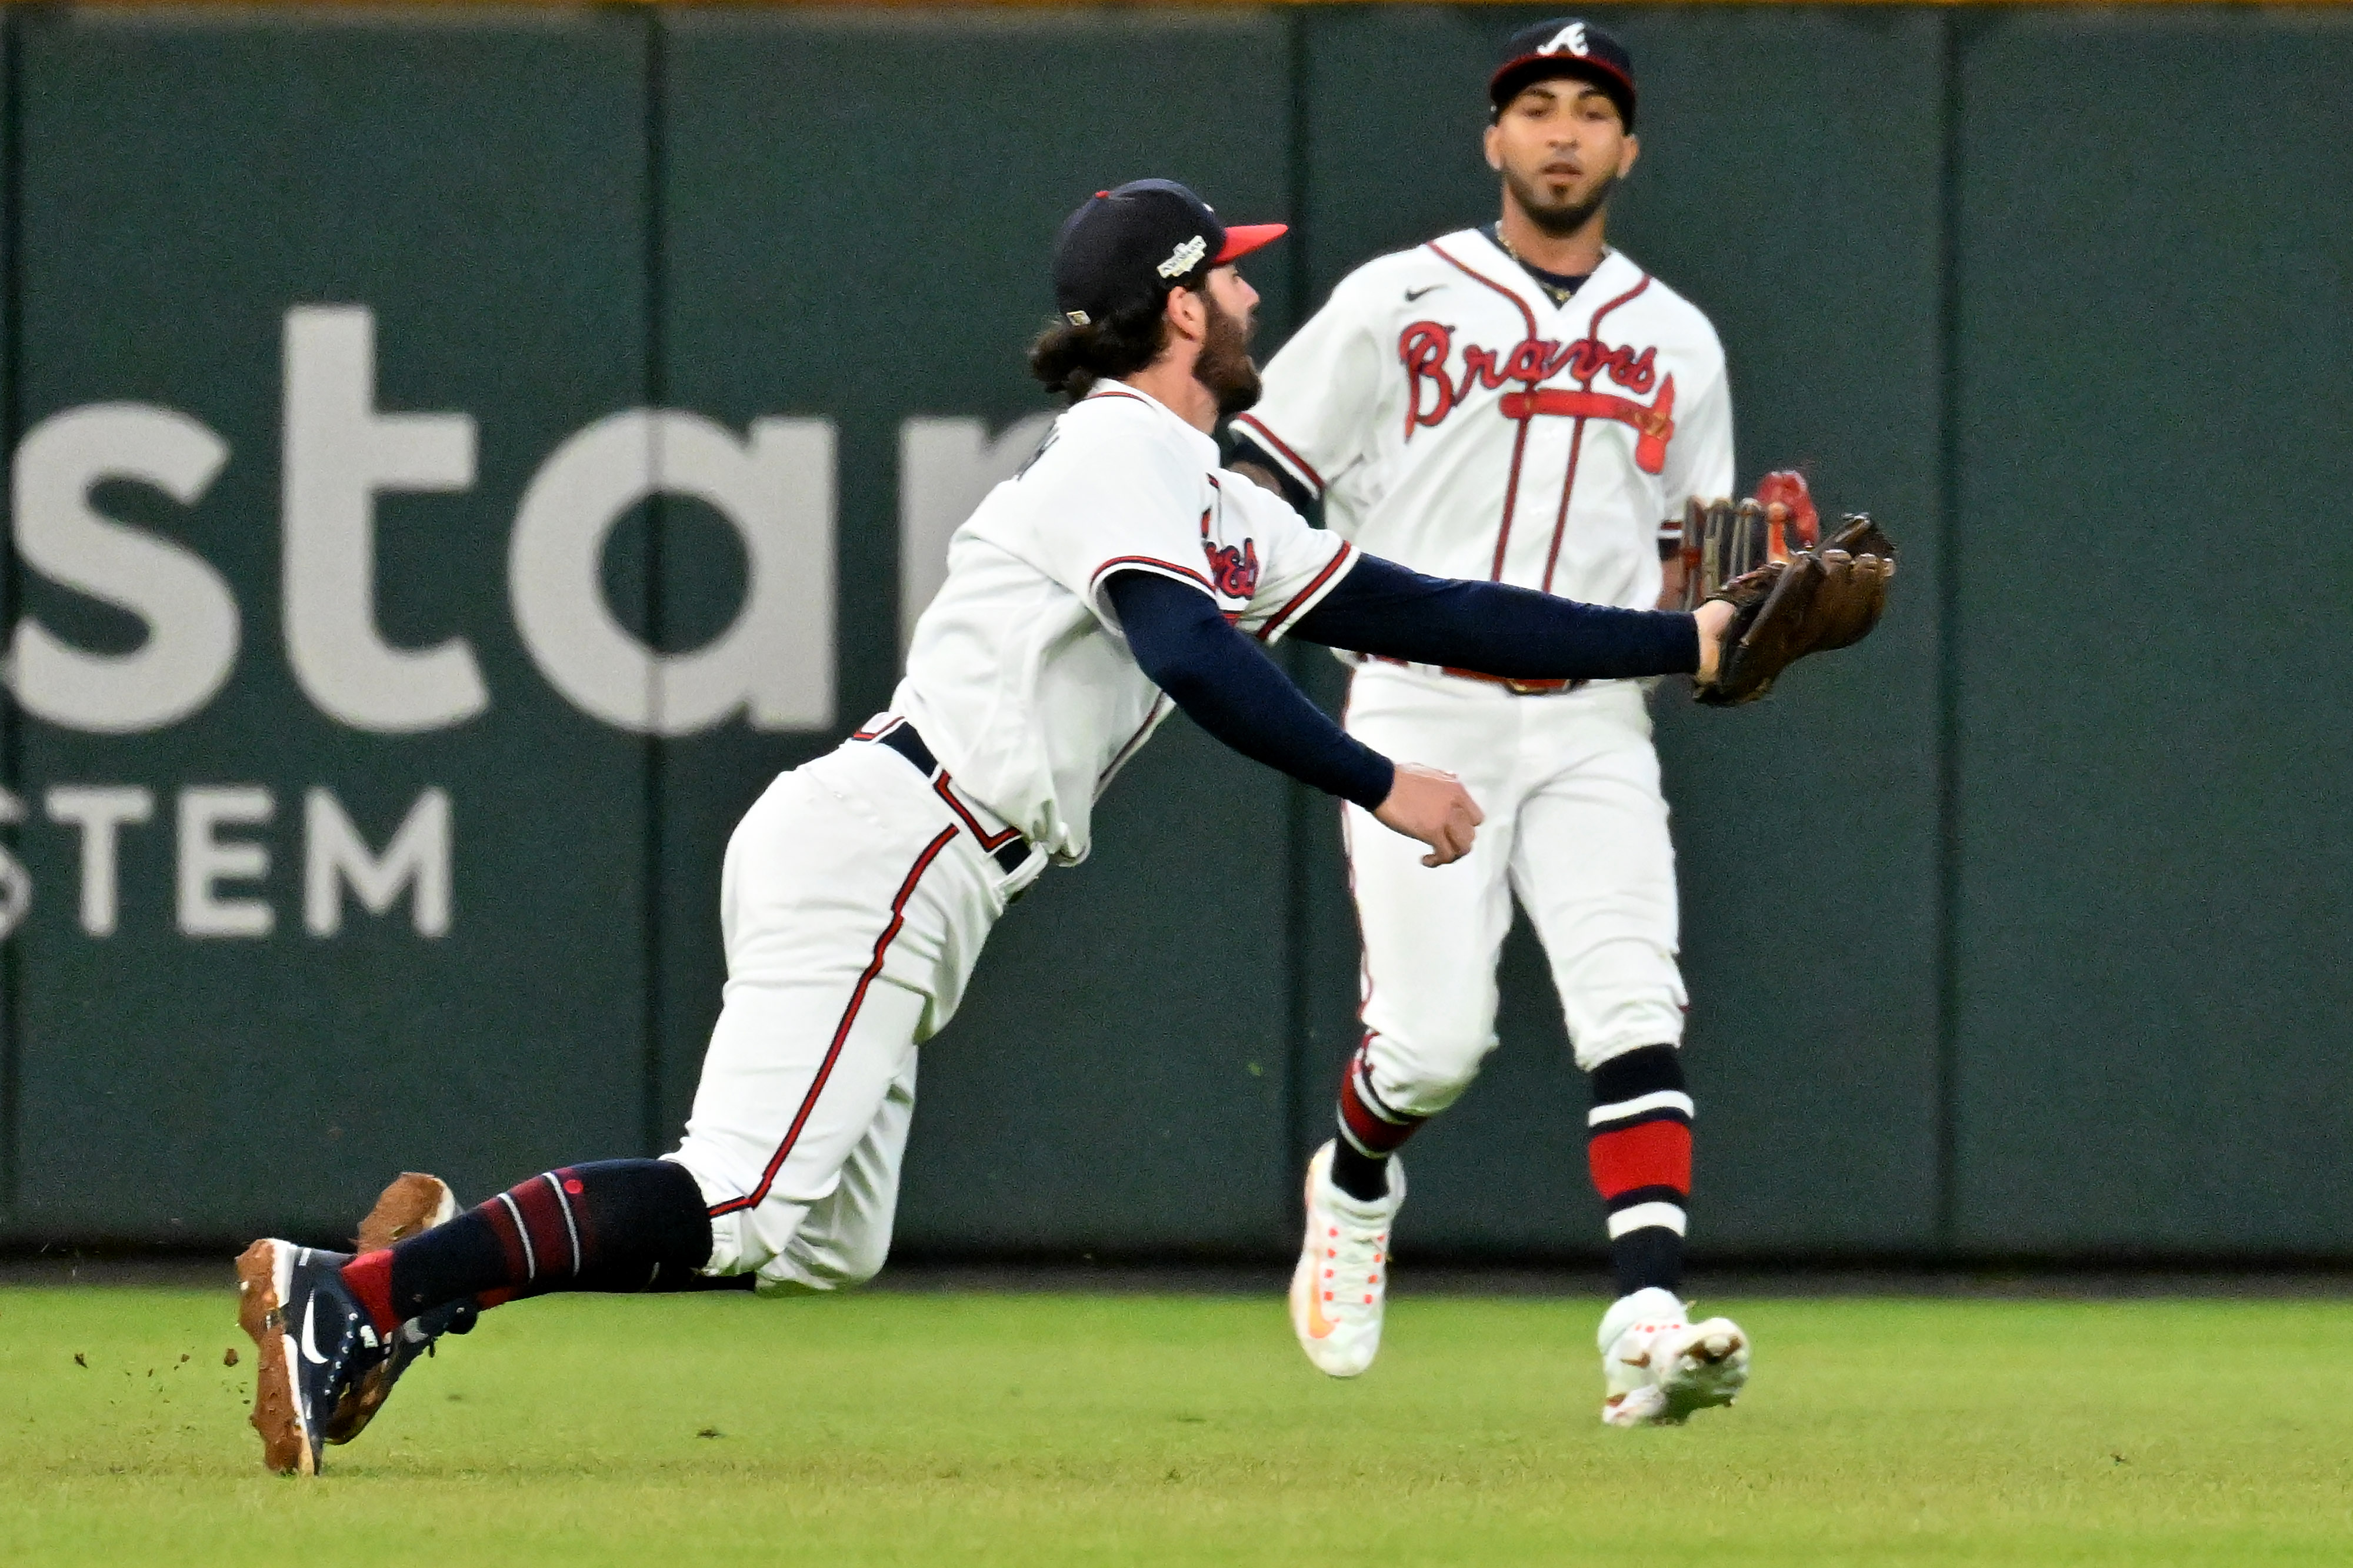 Dansby Swanson of the Atlanta Braves in action against the New